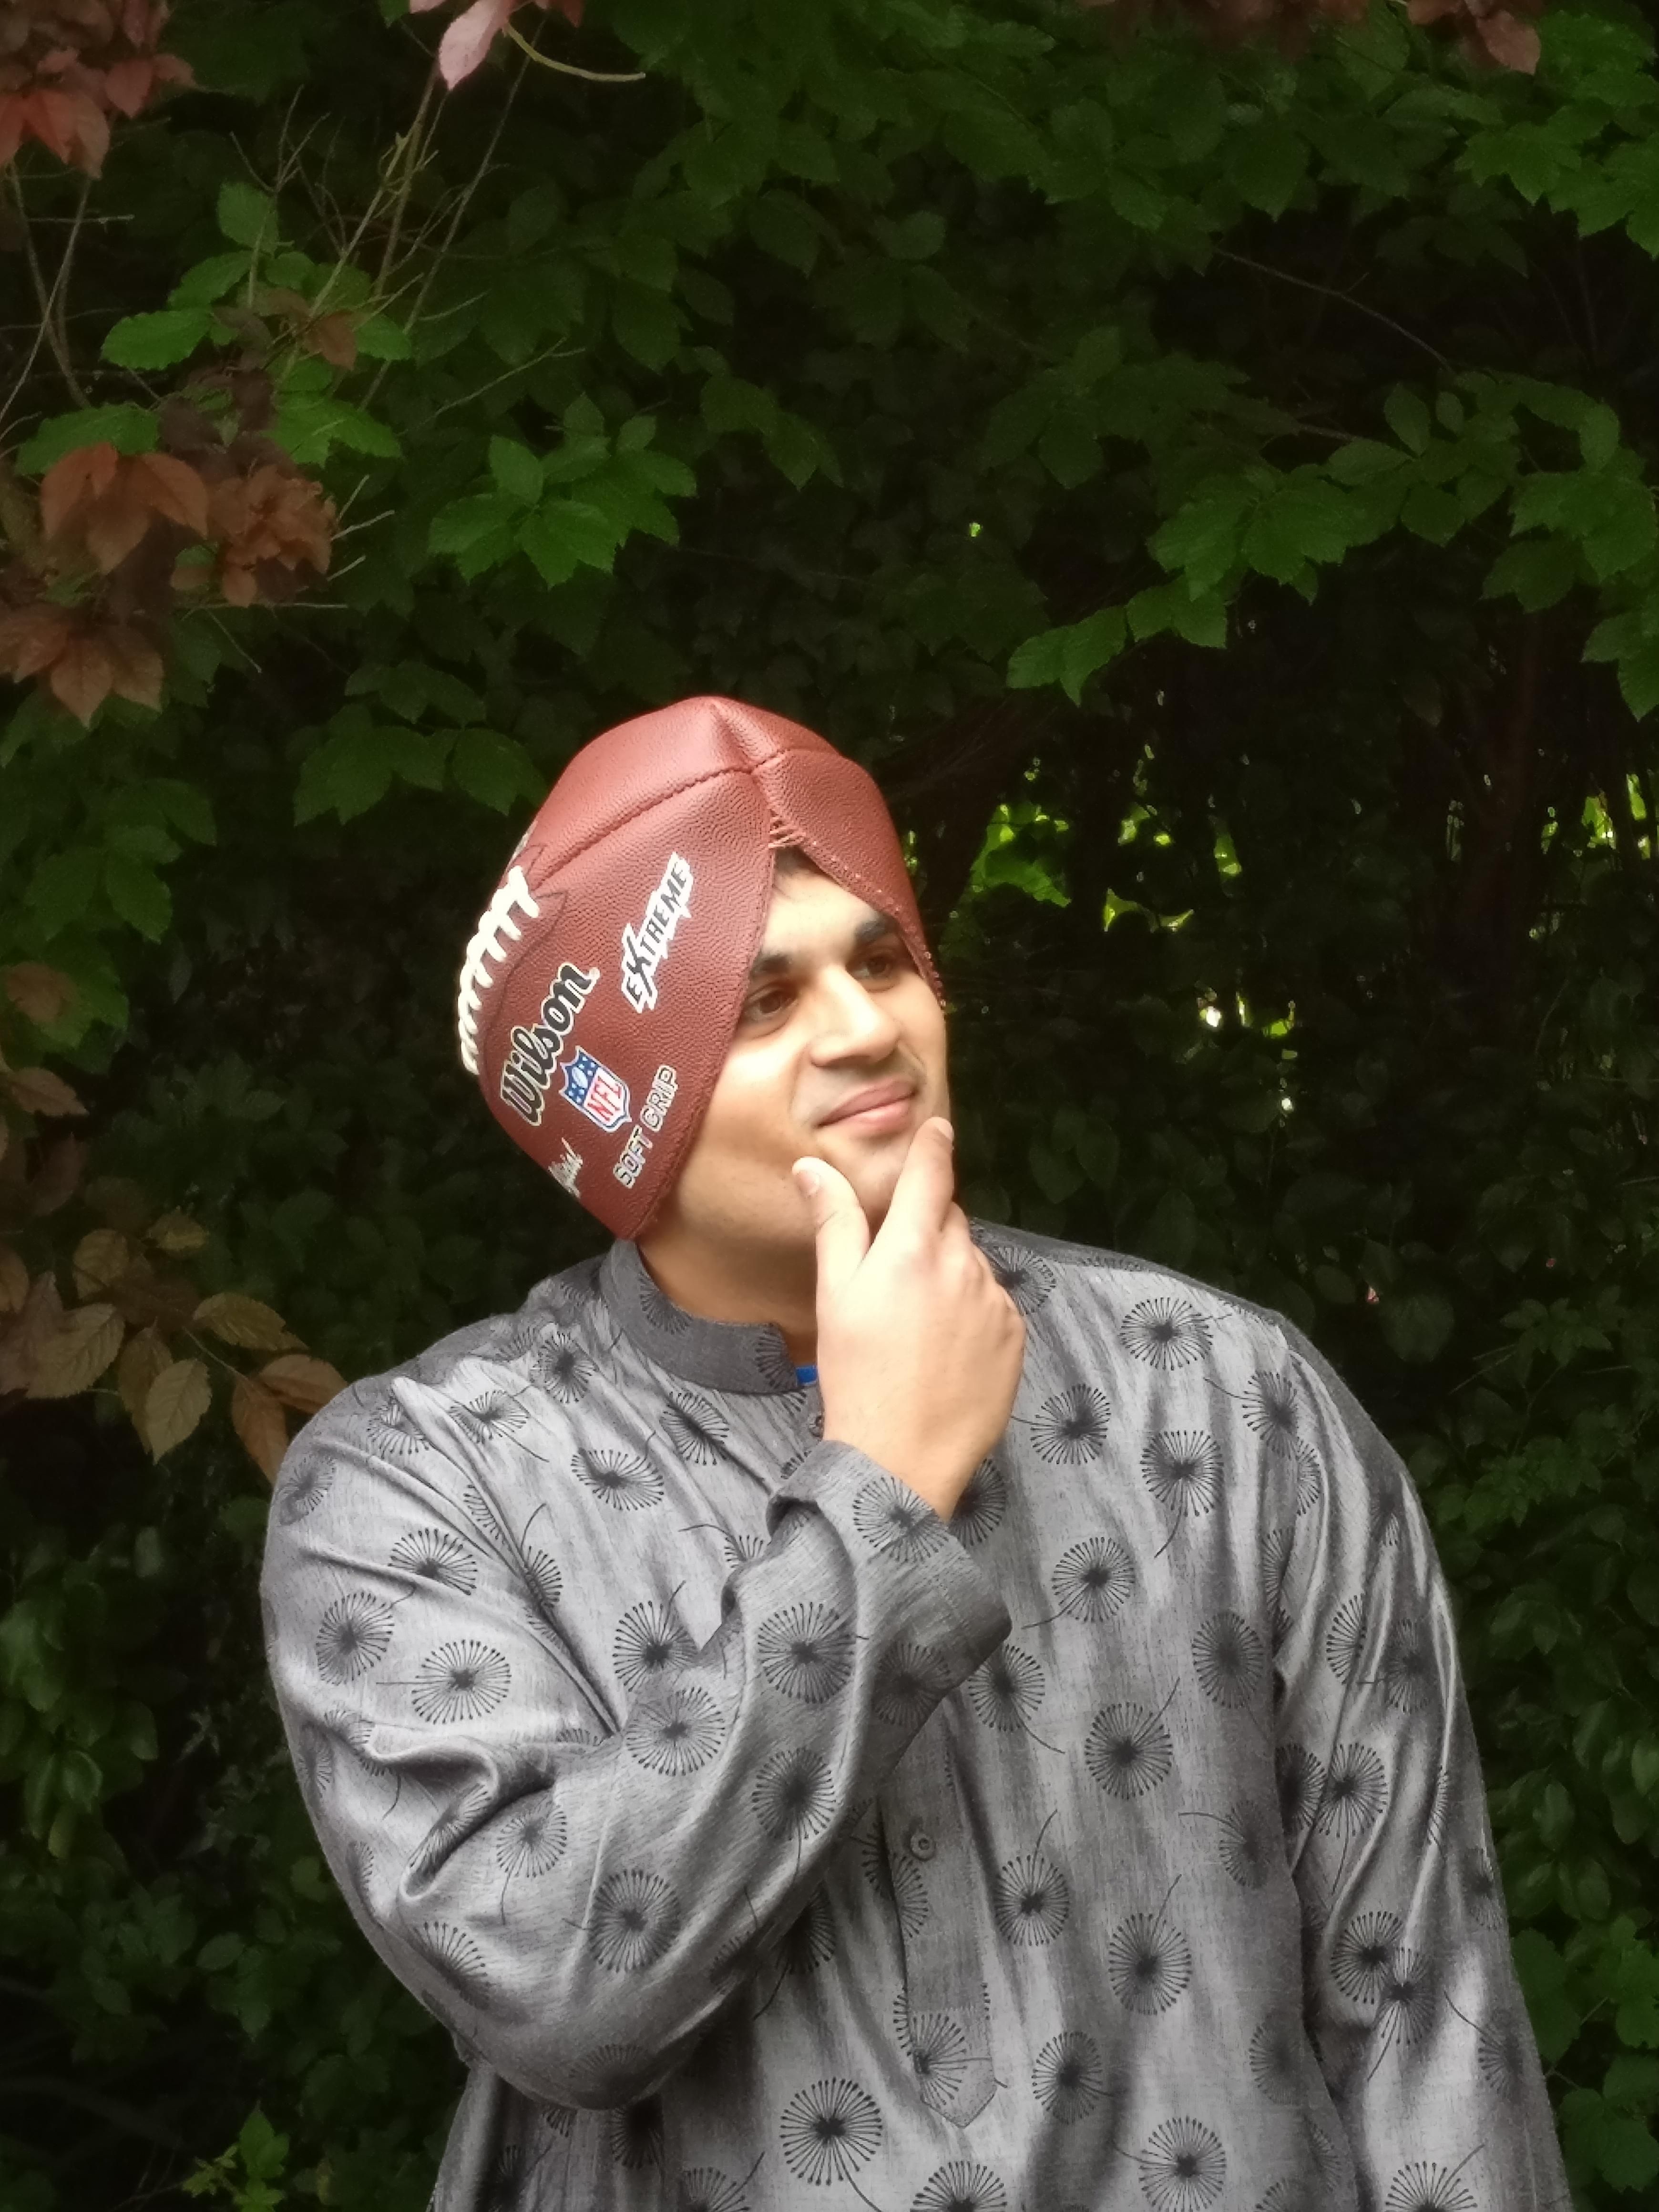 My friend's American football burst and he found out that it makes a great looking turban